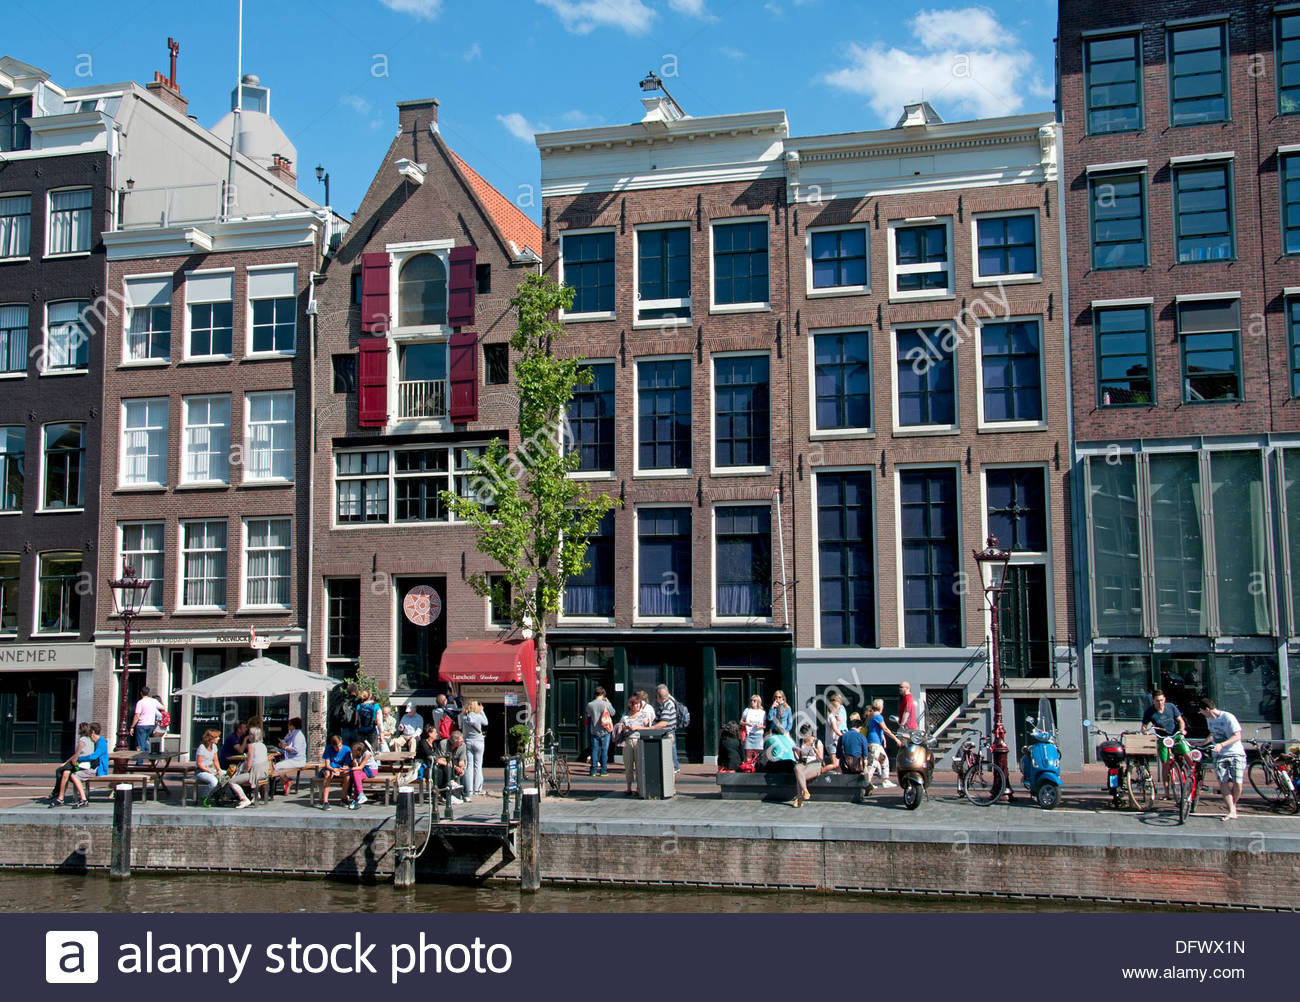 Anne Frank Haus Amsterdam
 The Anne Frank House Prinsengracht 263 265 canal in